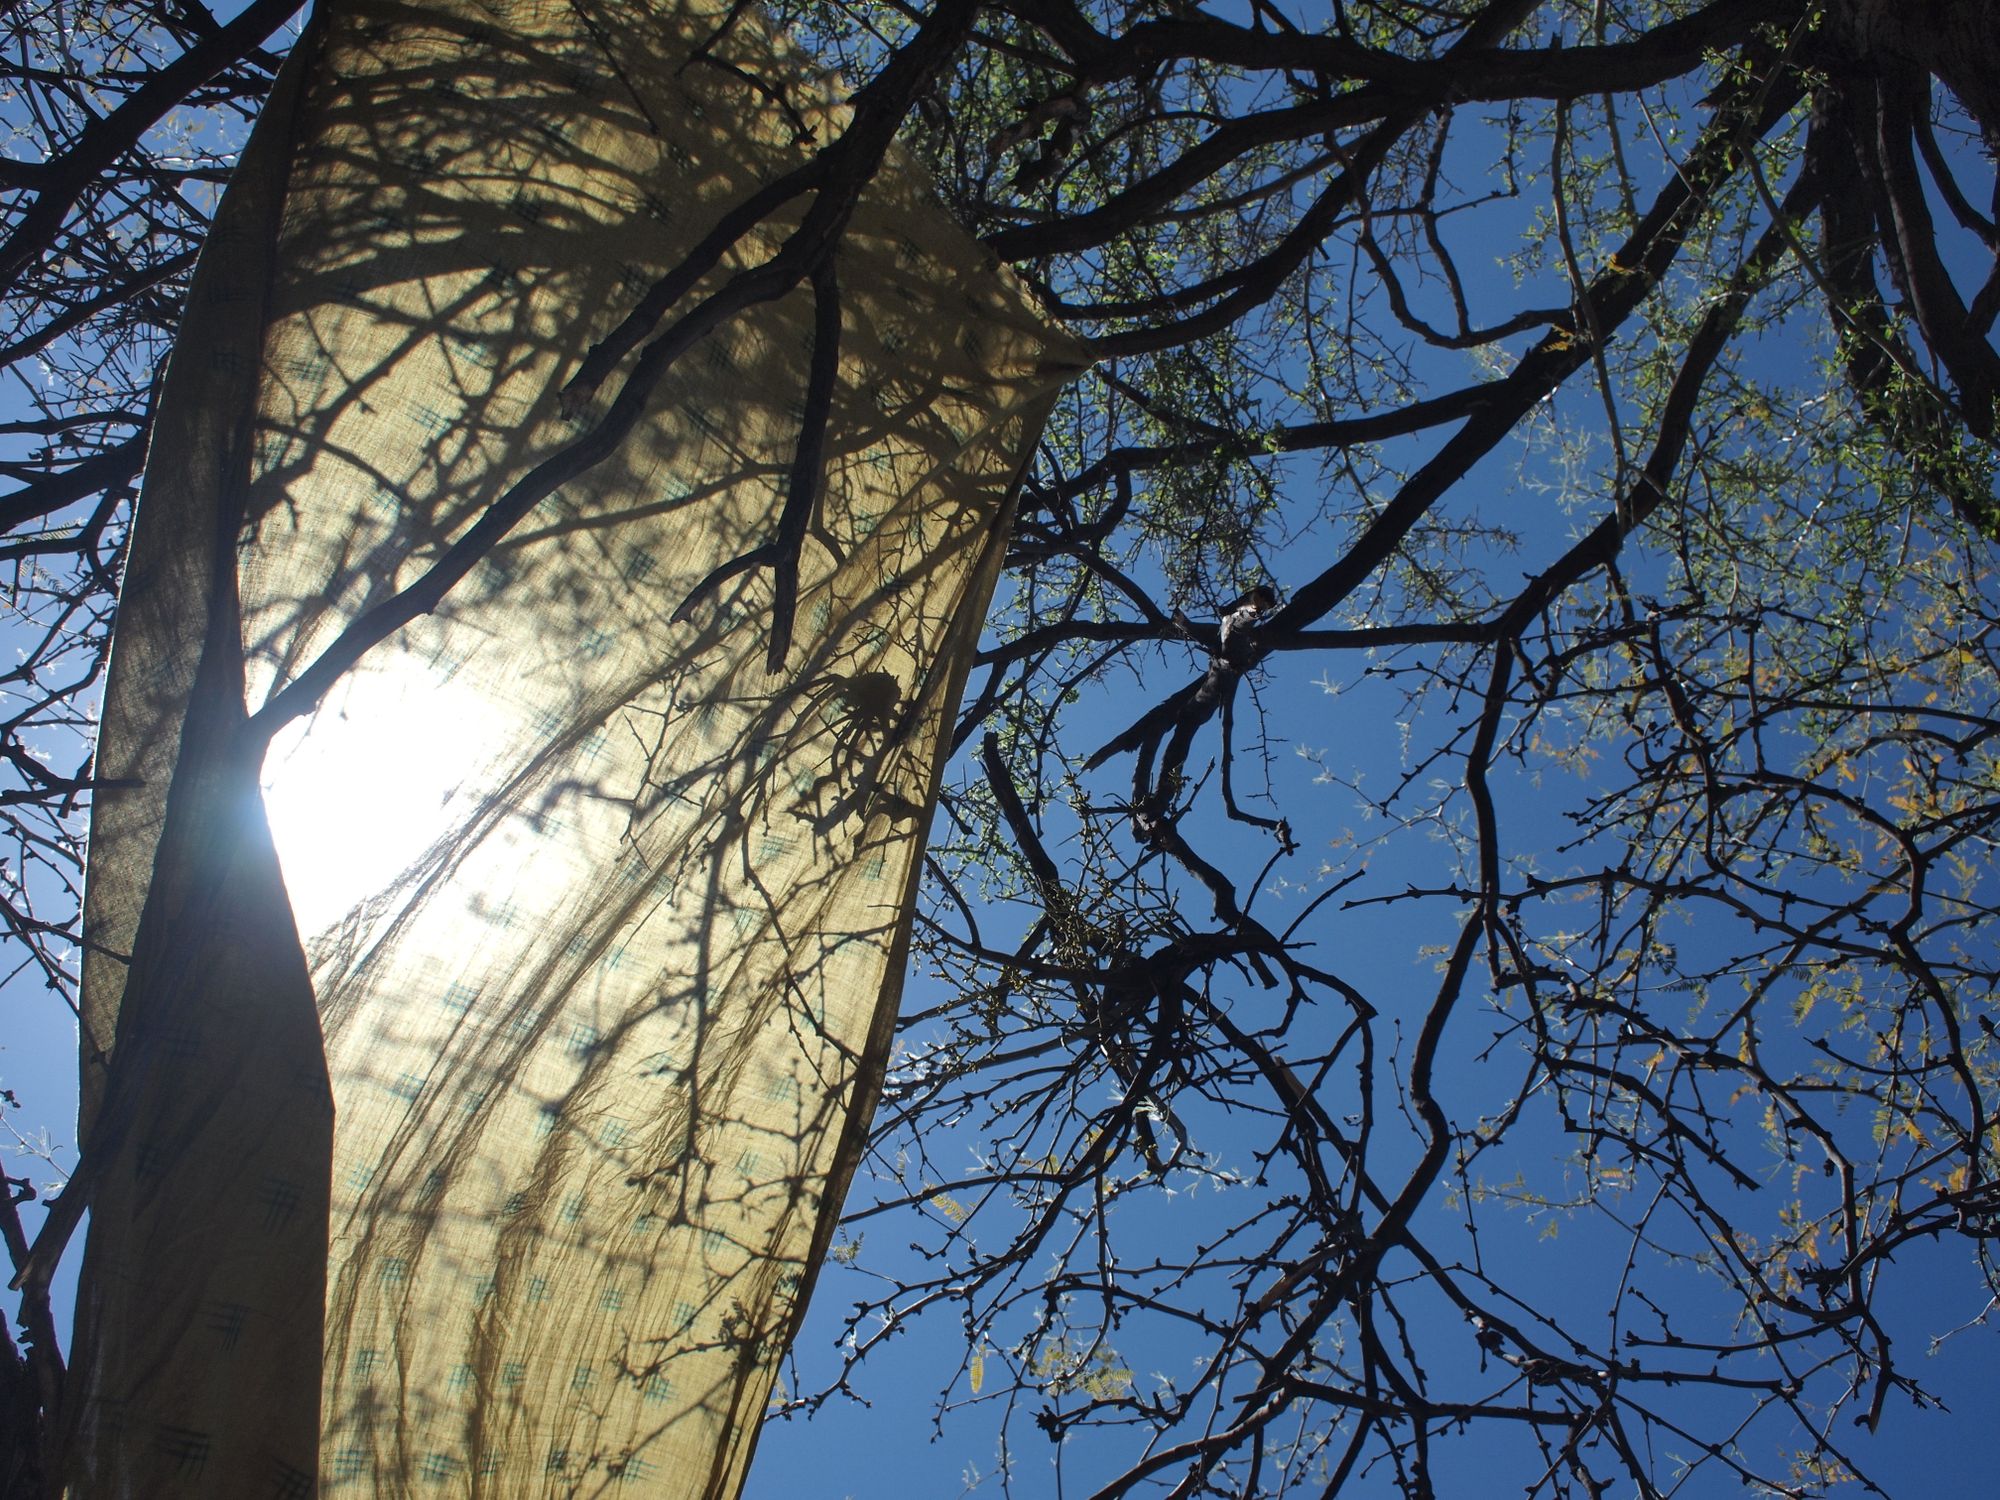 looking up through the branches of a mesquite tree to a blue sky. In the tree hangs a green piece of fabric for shade. 